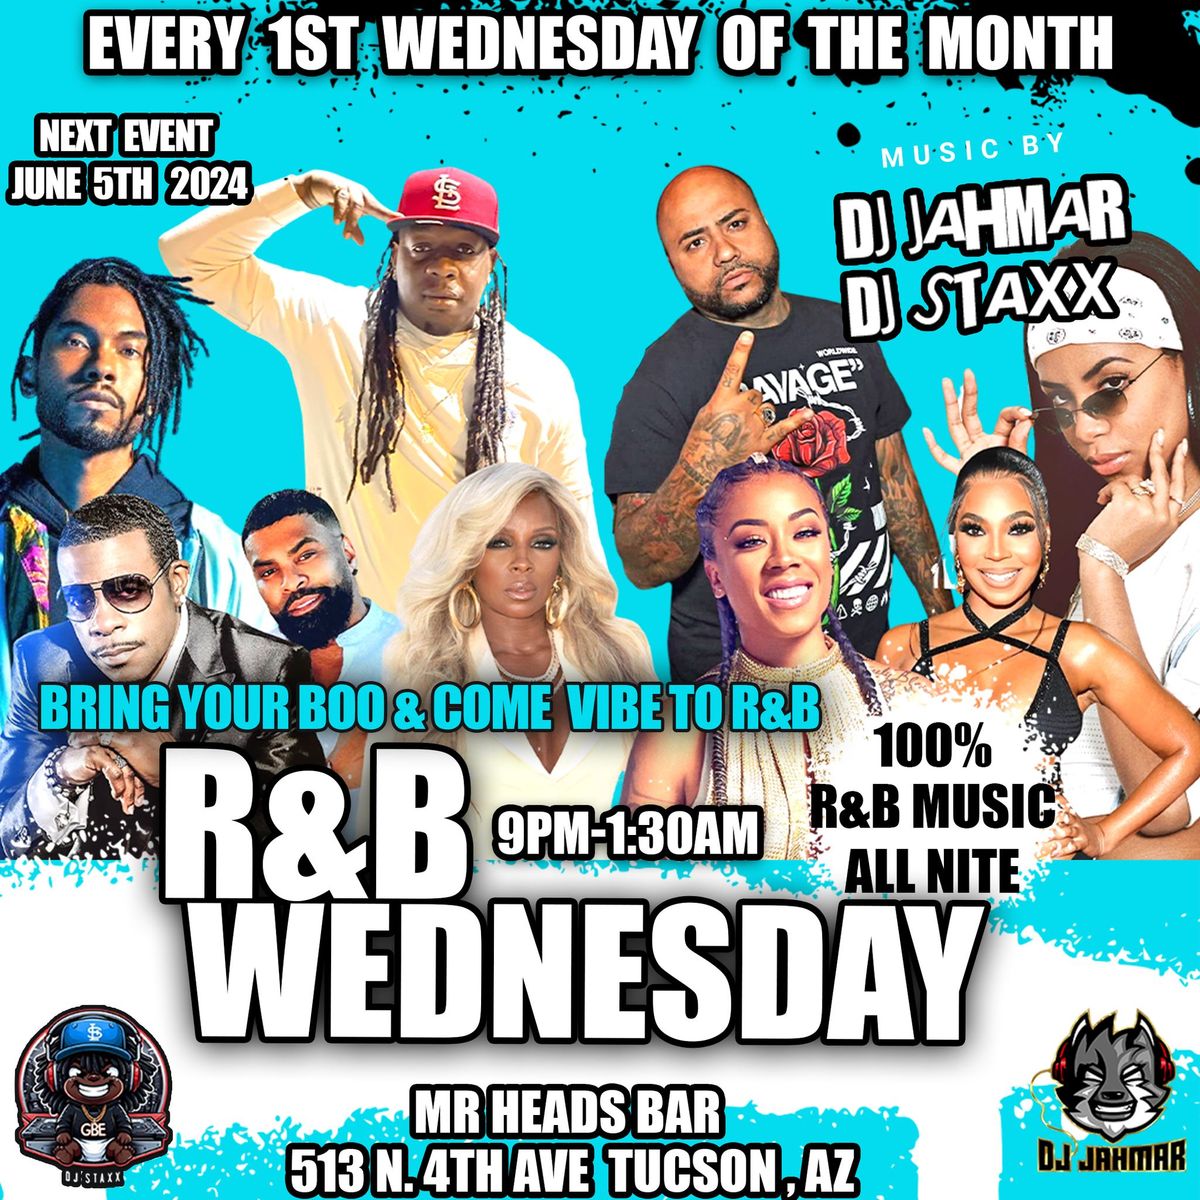 RNB WEDNESDAY MONTHLY EVENT